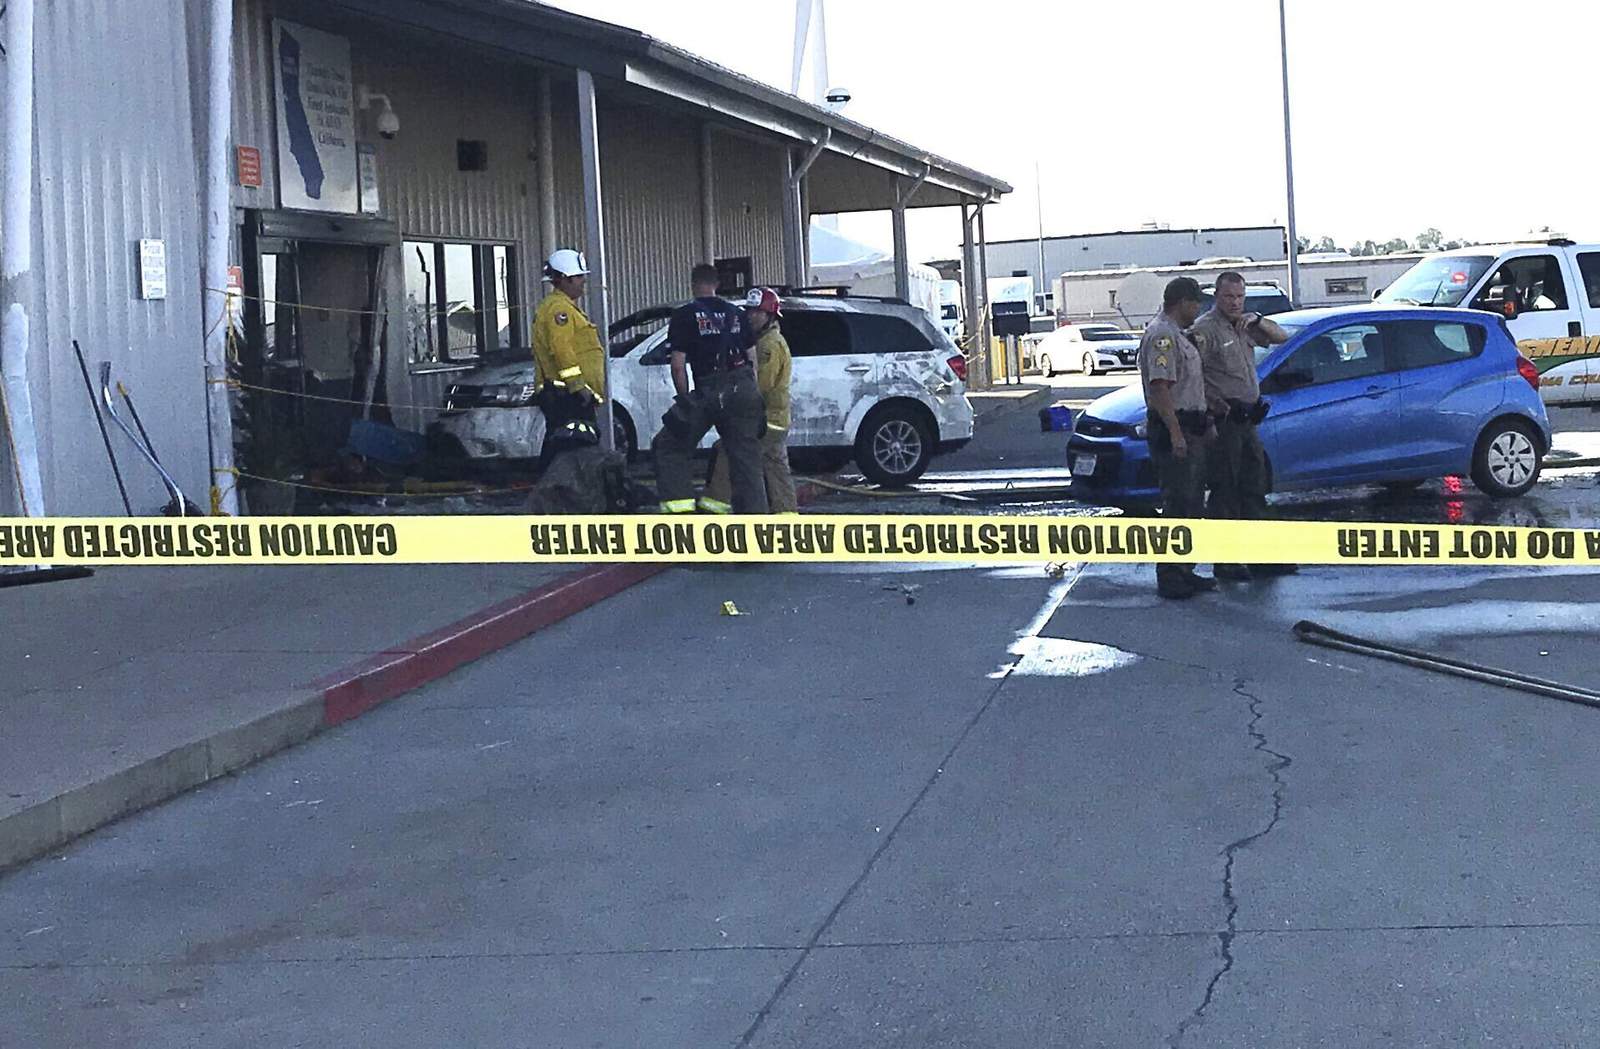 2 dead after shooting at California distribution center